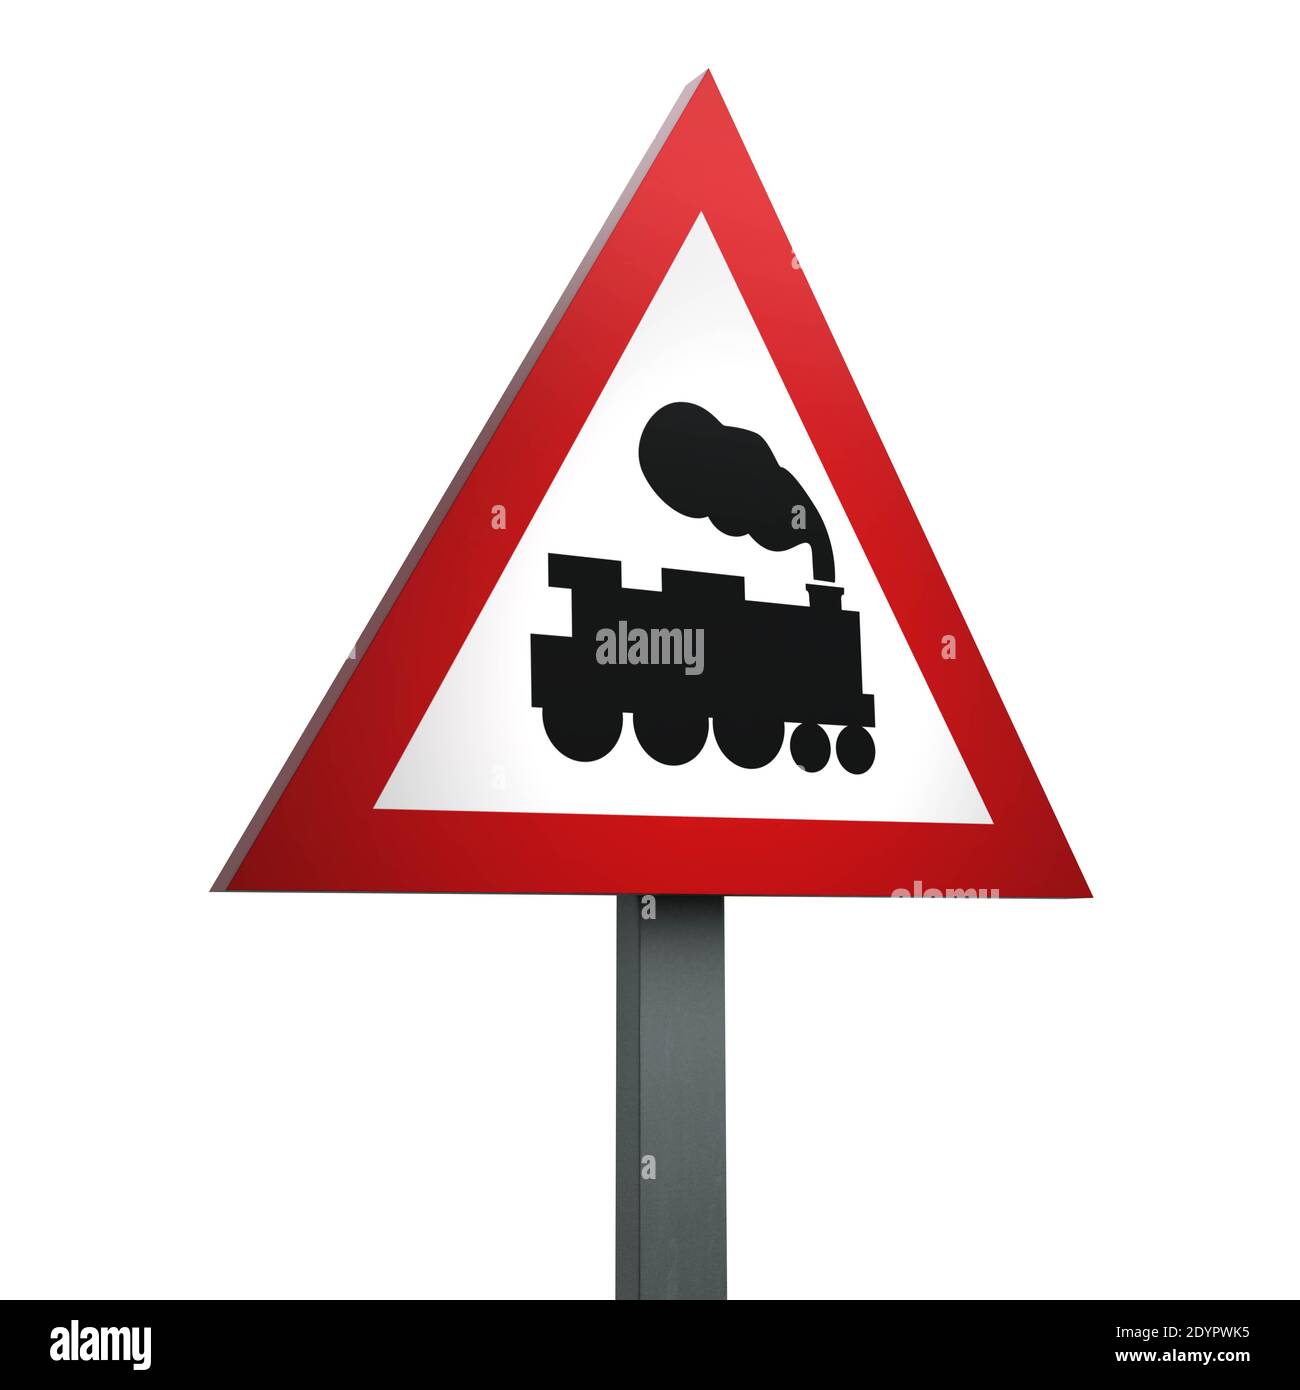 3d Render Road Sign Of Level Crossing Without Barrier Isolated On A White Bac Stock Photo Alamy